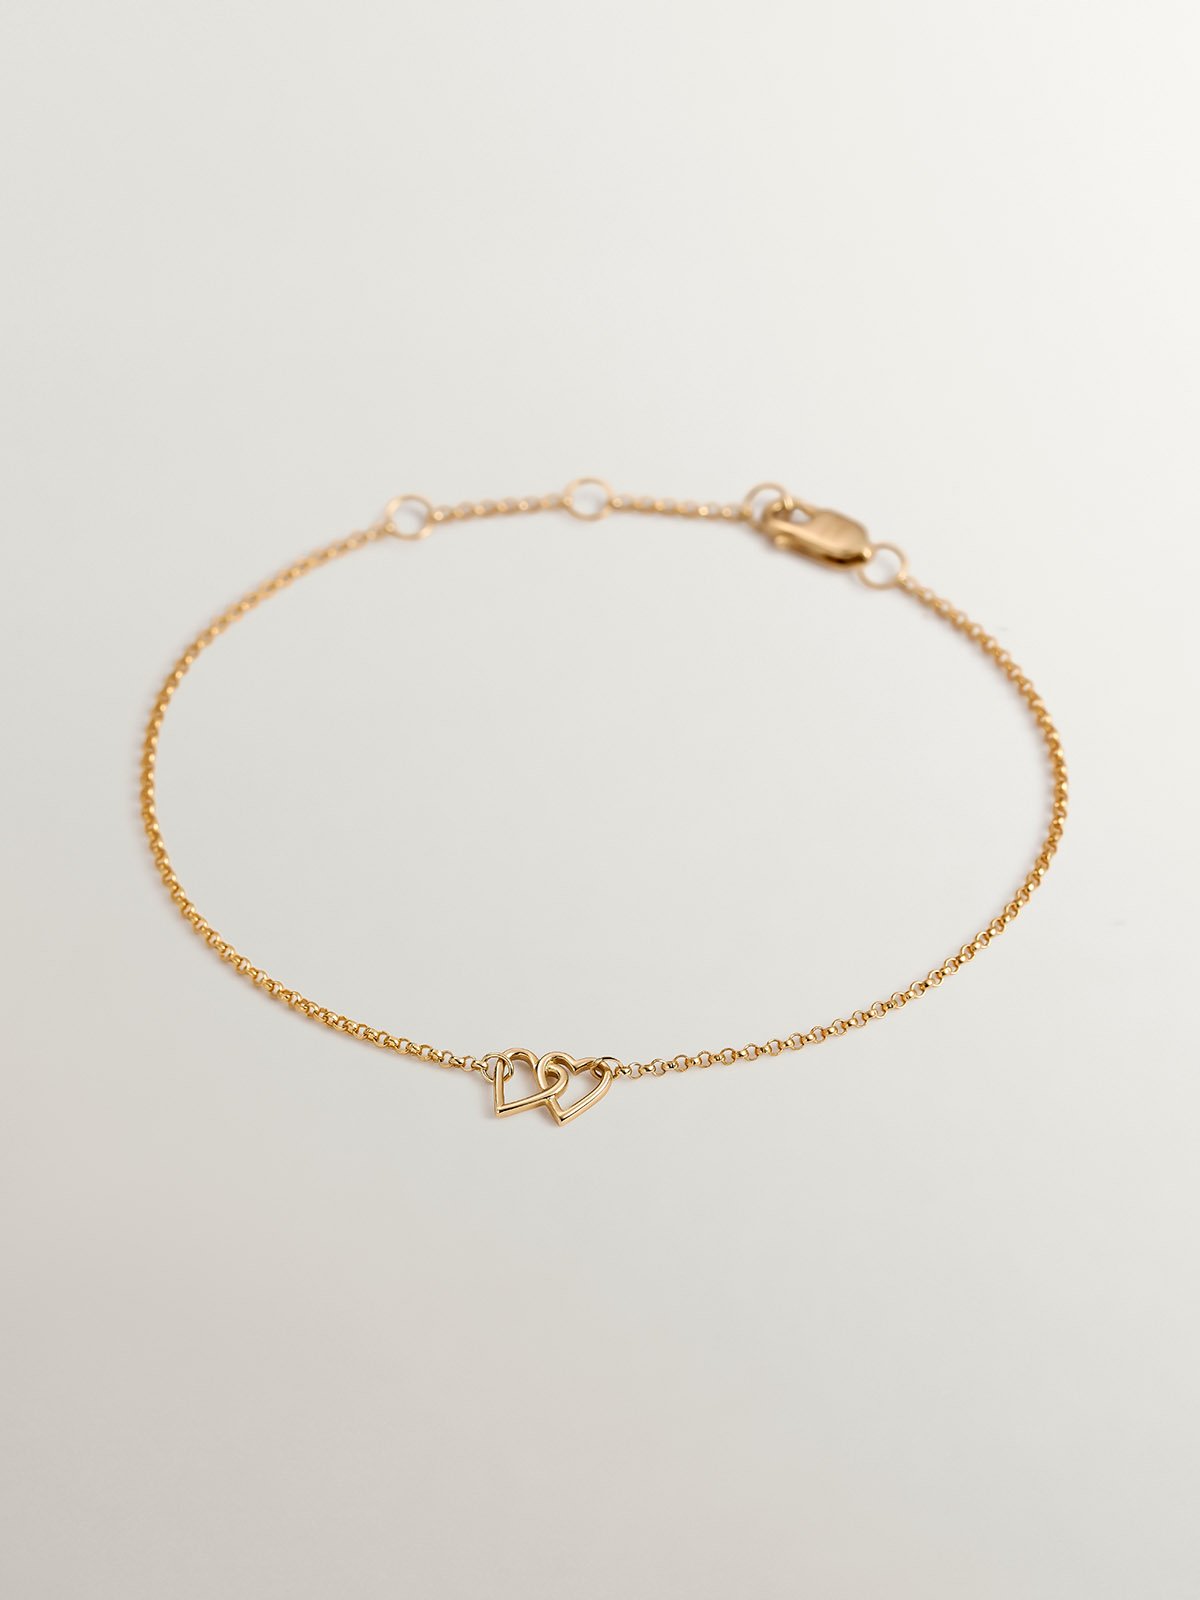 9K Yellow Gold bracelet with interlaced hearts